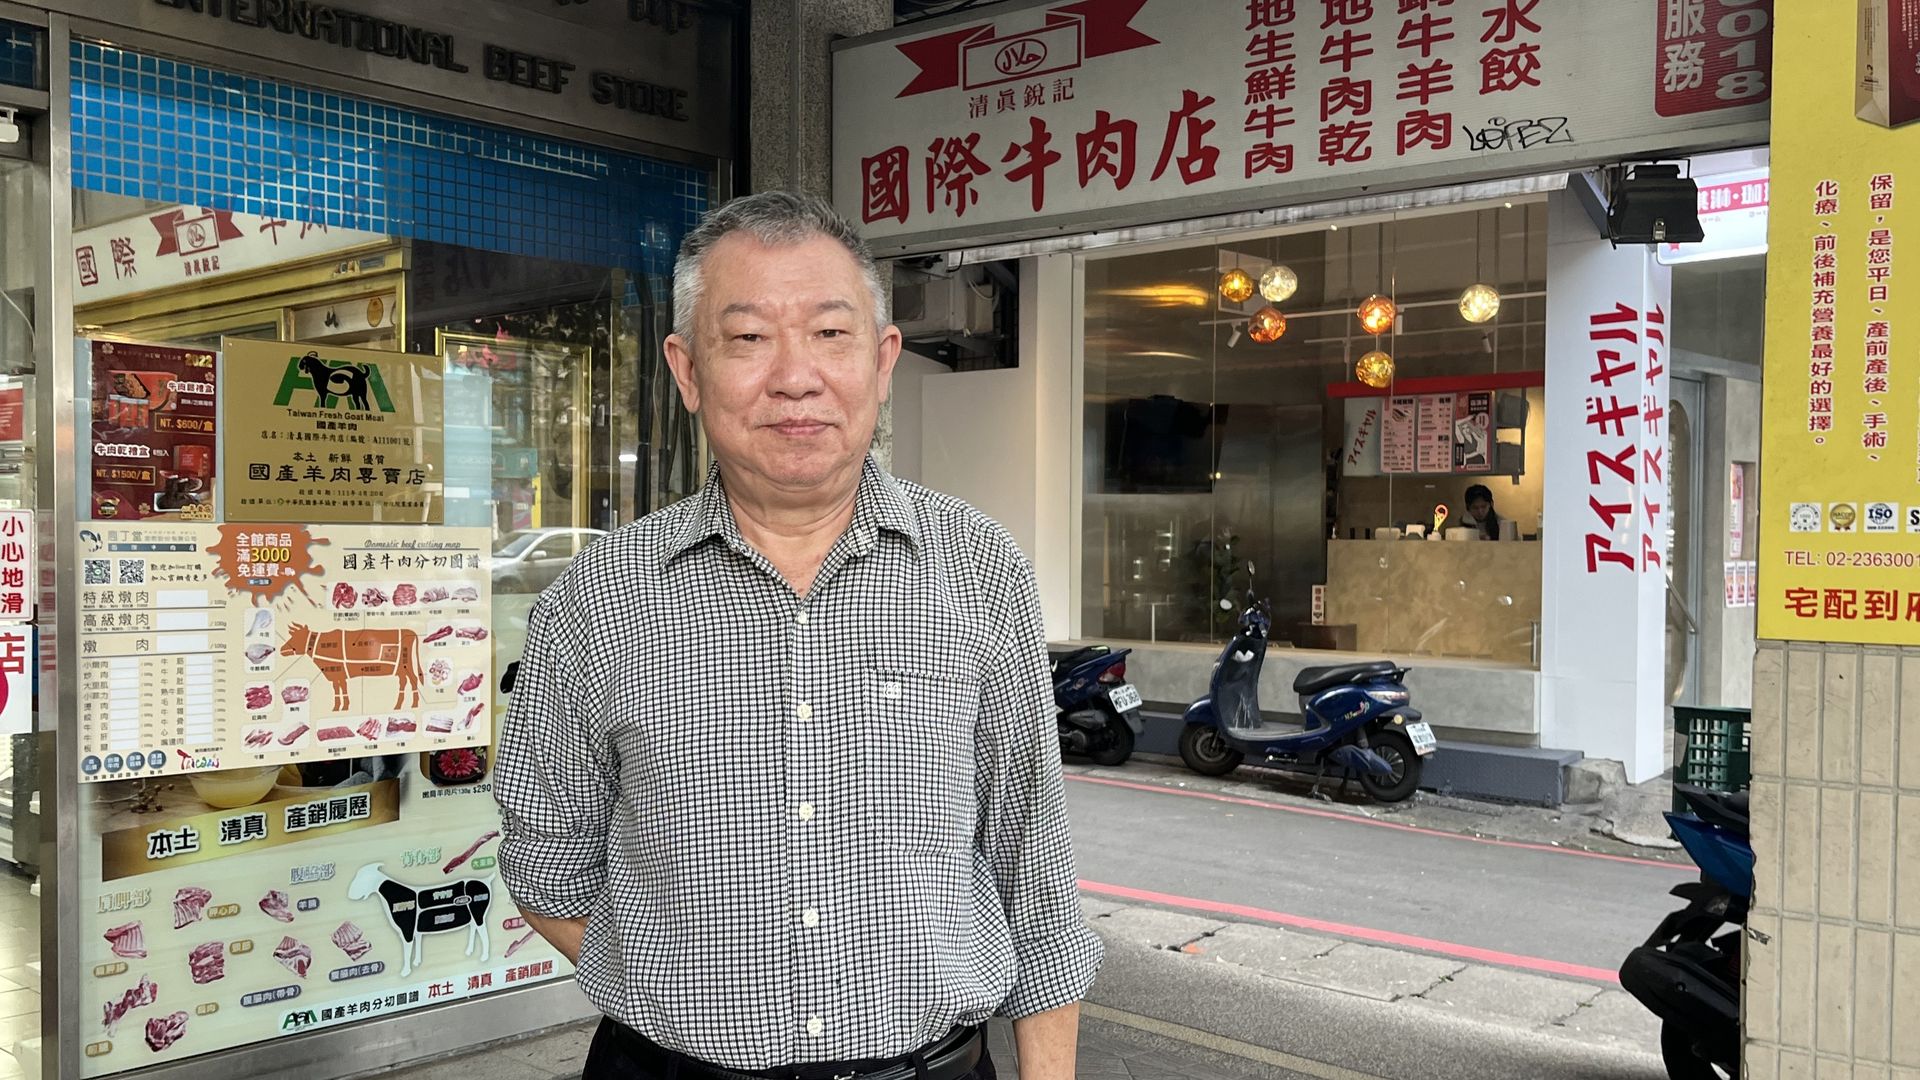 Mohammed Ma stands in front of a halal butcher shop in Taipei, Taiwan on January 12, 2023.